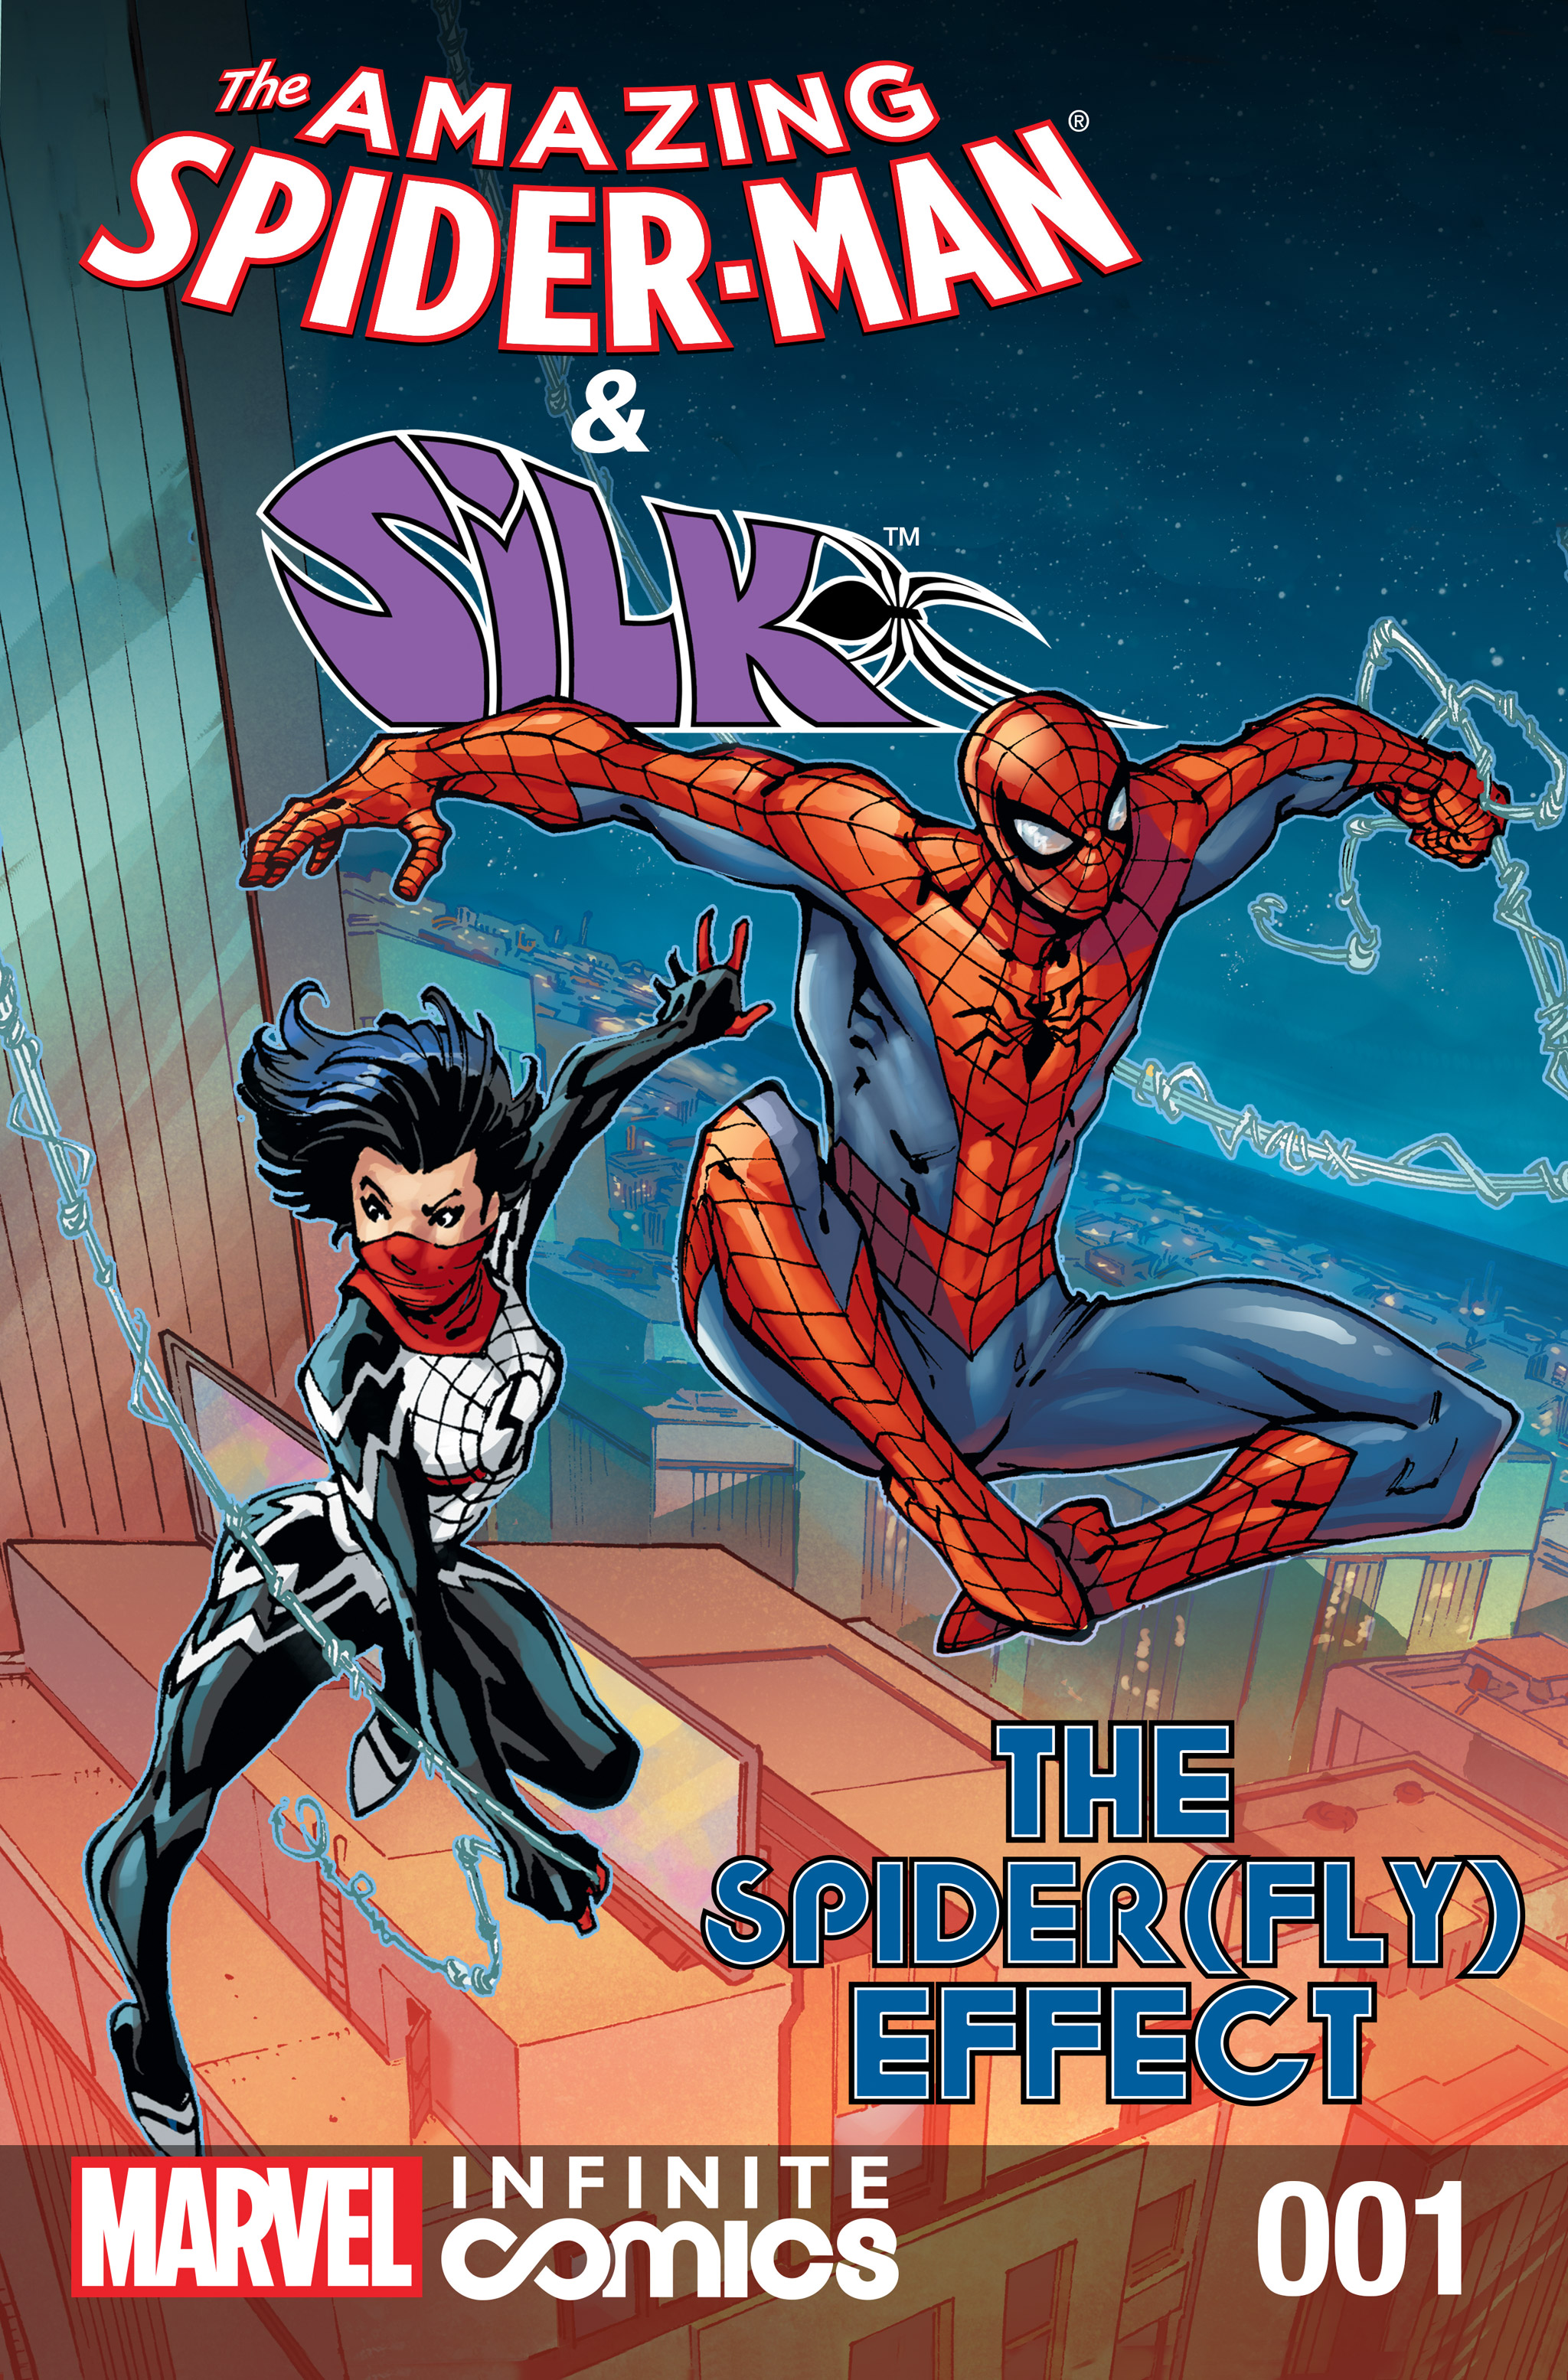 Read online The Amazing Spider-Man & Silk: The Spider(fly) Effect (Infinite Comics) comic -  Issue #1 - 1